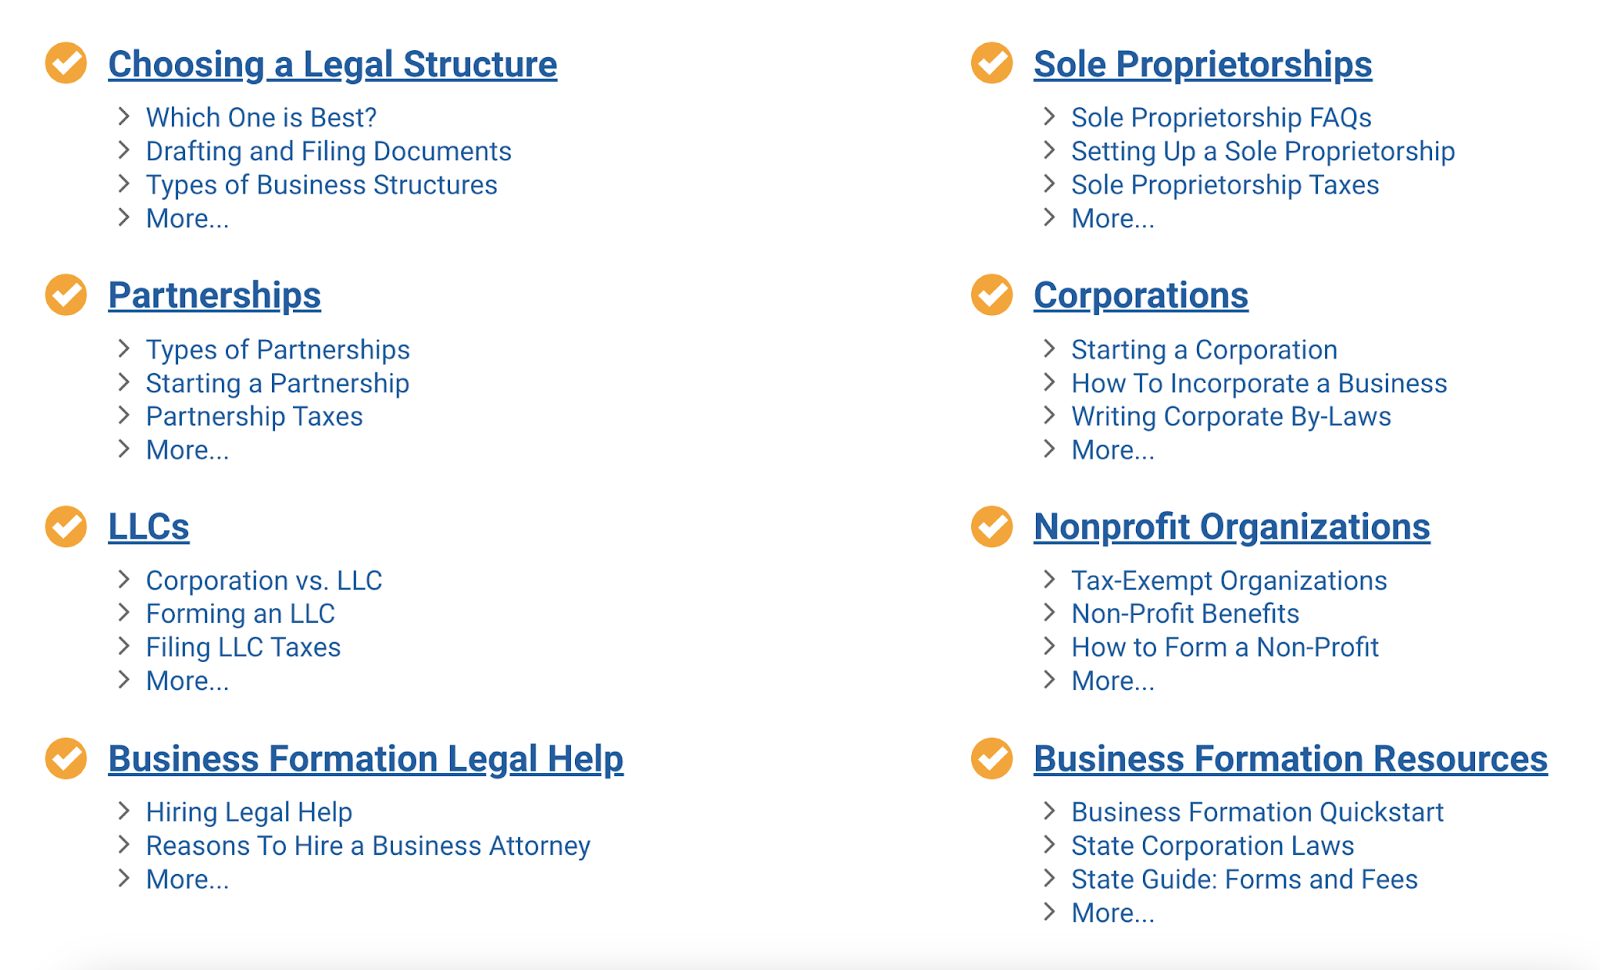 FindLaw's topic cluster about incorporation and legal structures